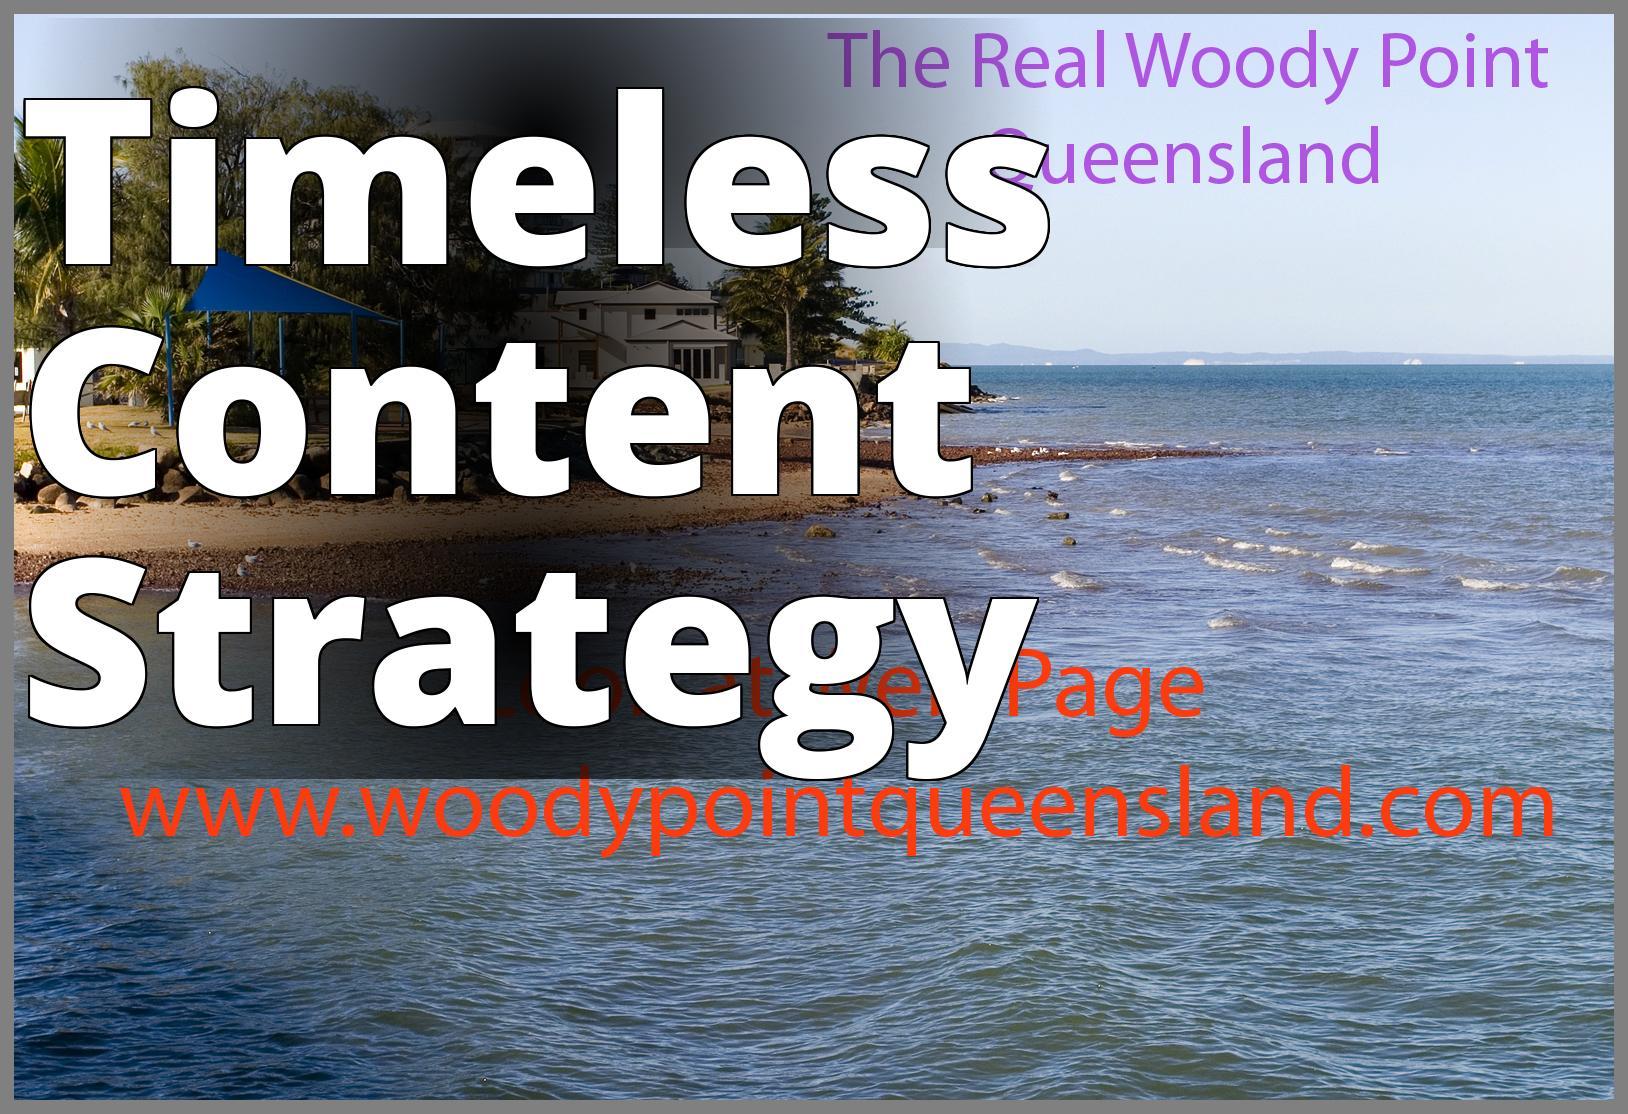 Woody Point's Point Web Page (2826140363) - the real way point queensland